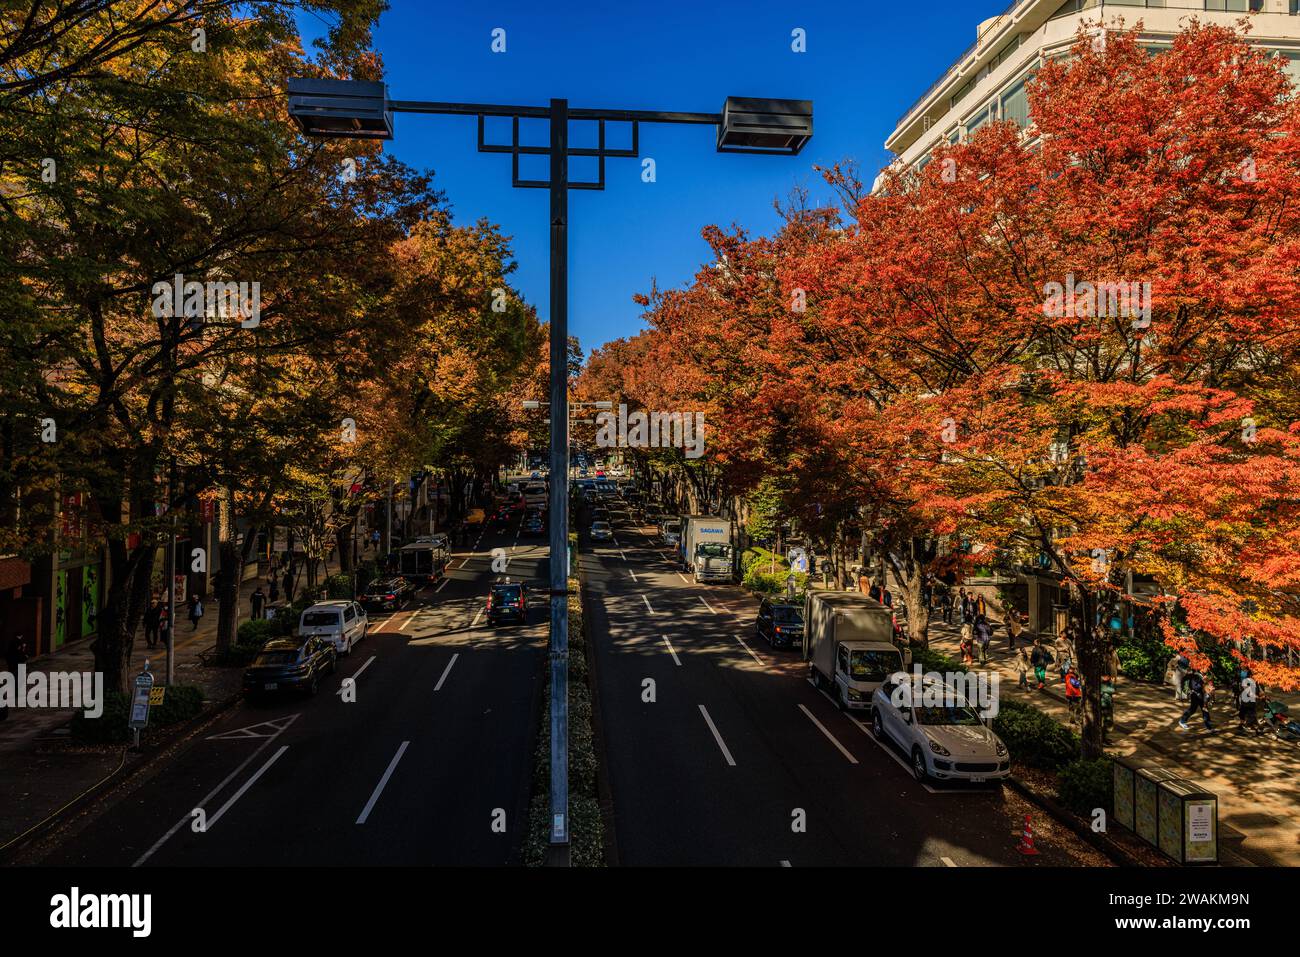 omotesando street lined with autumn colour on elm trees shading the upmarket fashion stores and cafes of the busy boulevard Stock Photo